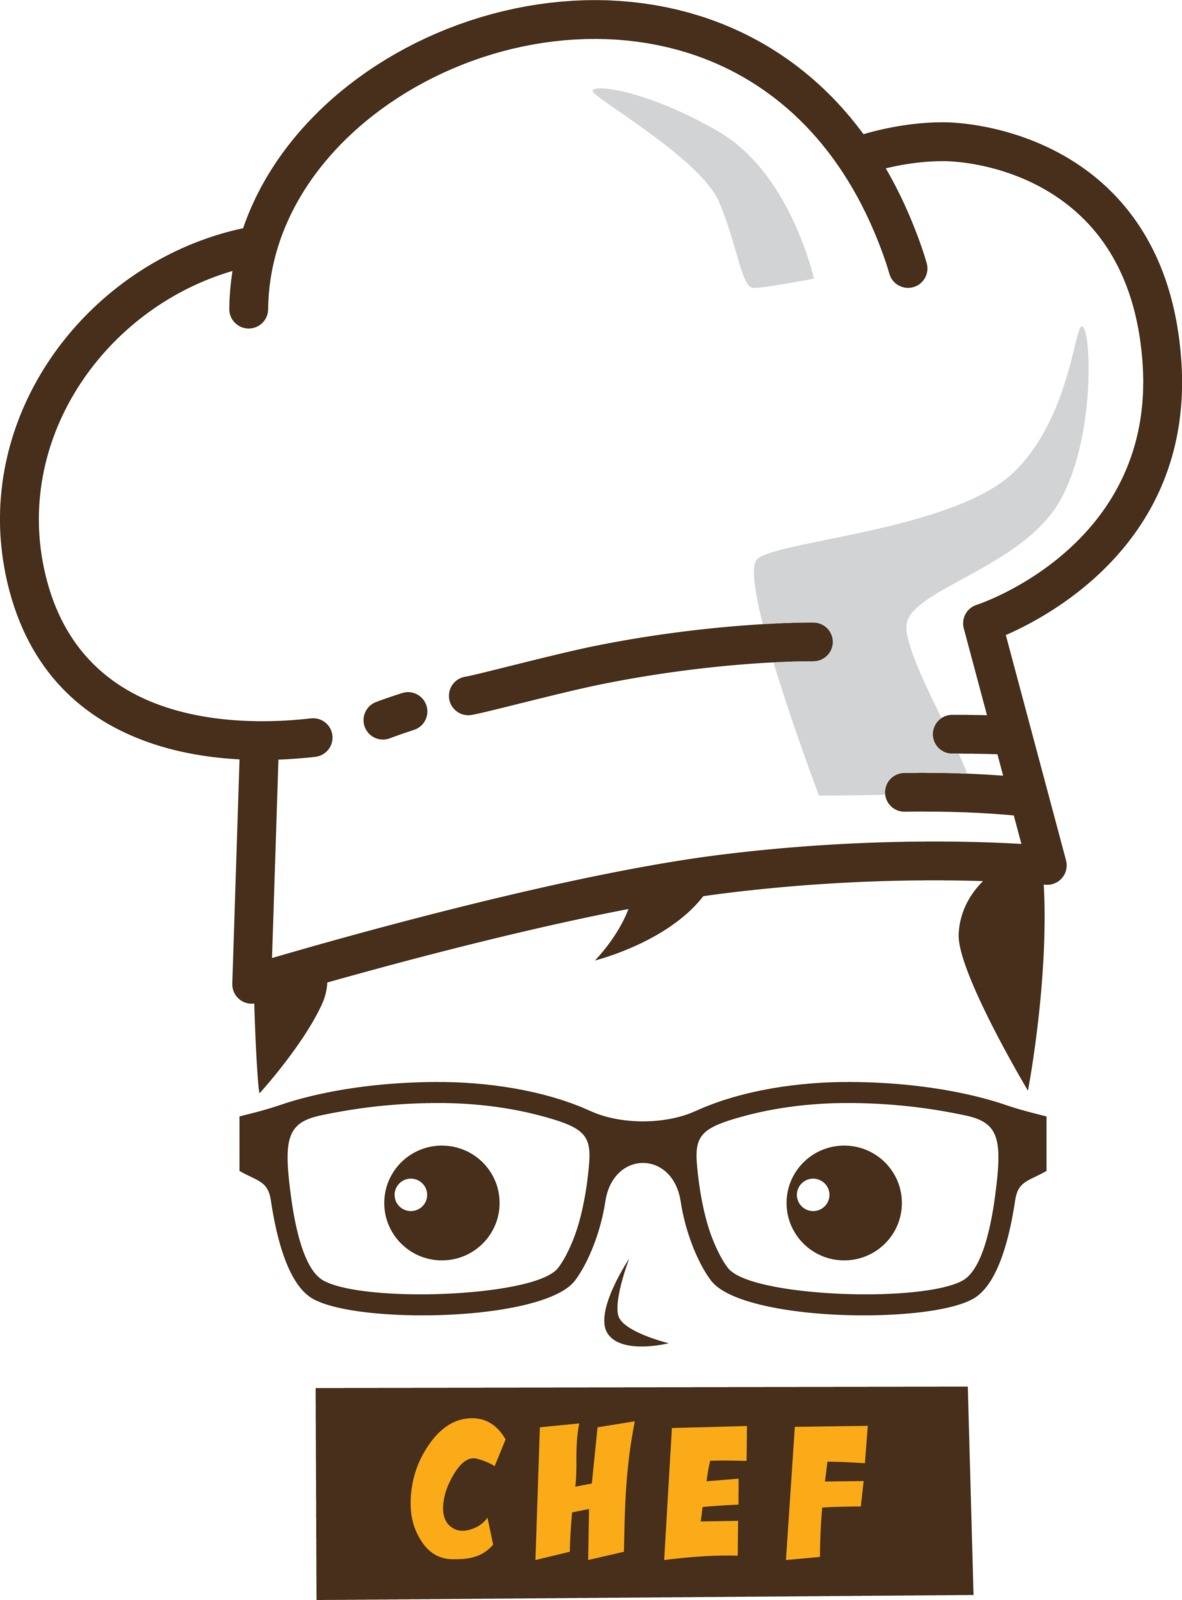 male master chef character cartoon art logo icon by vector1st